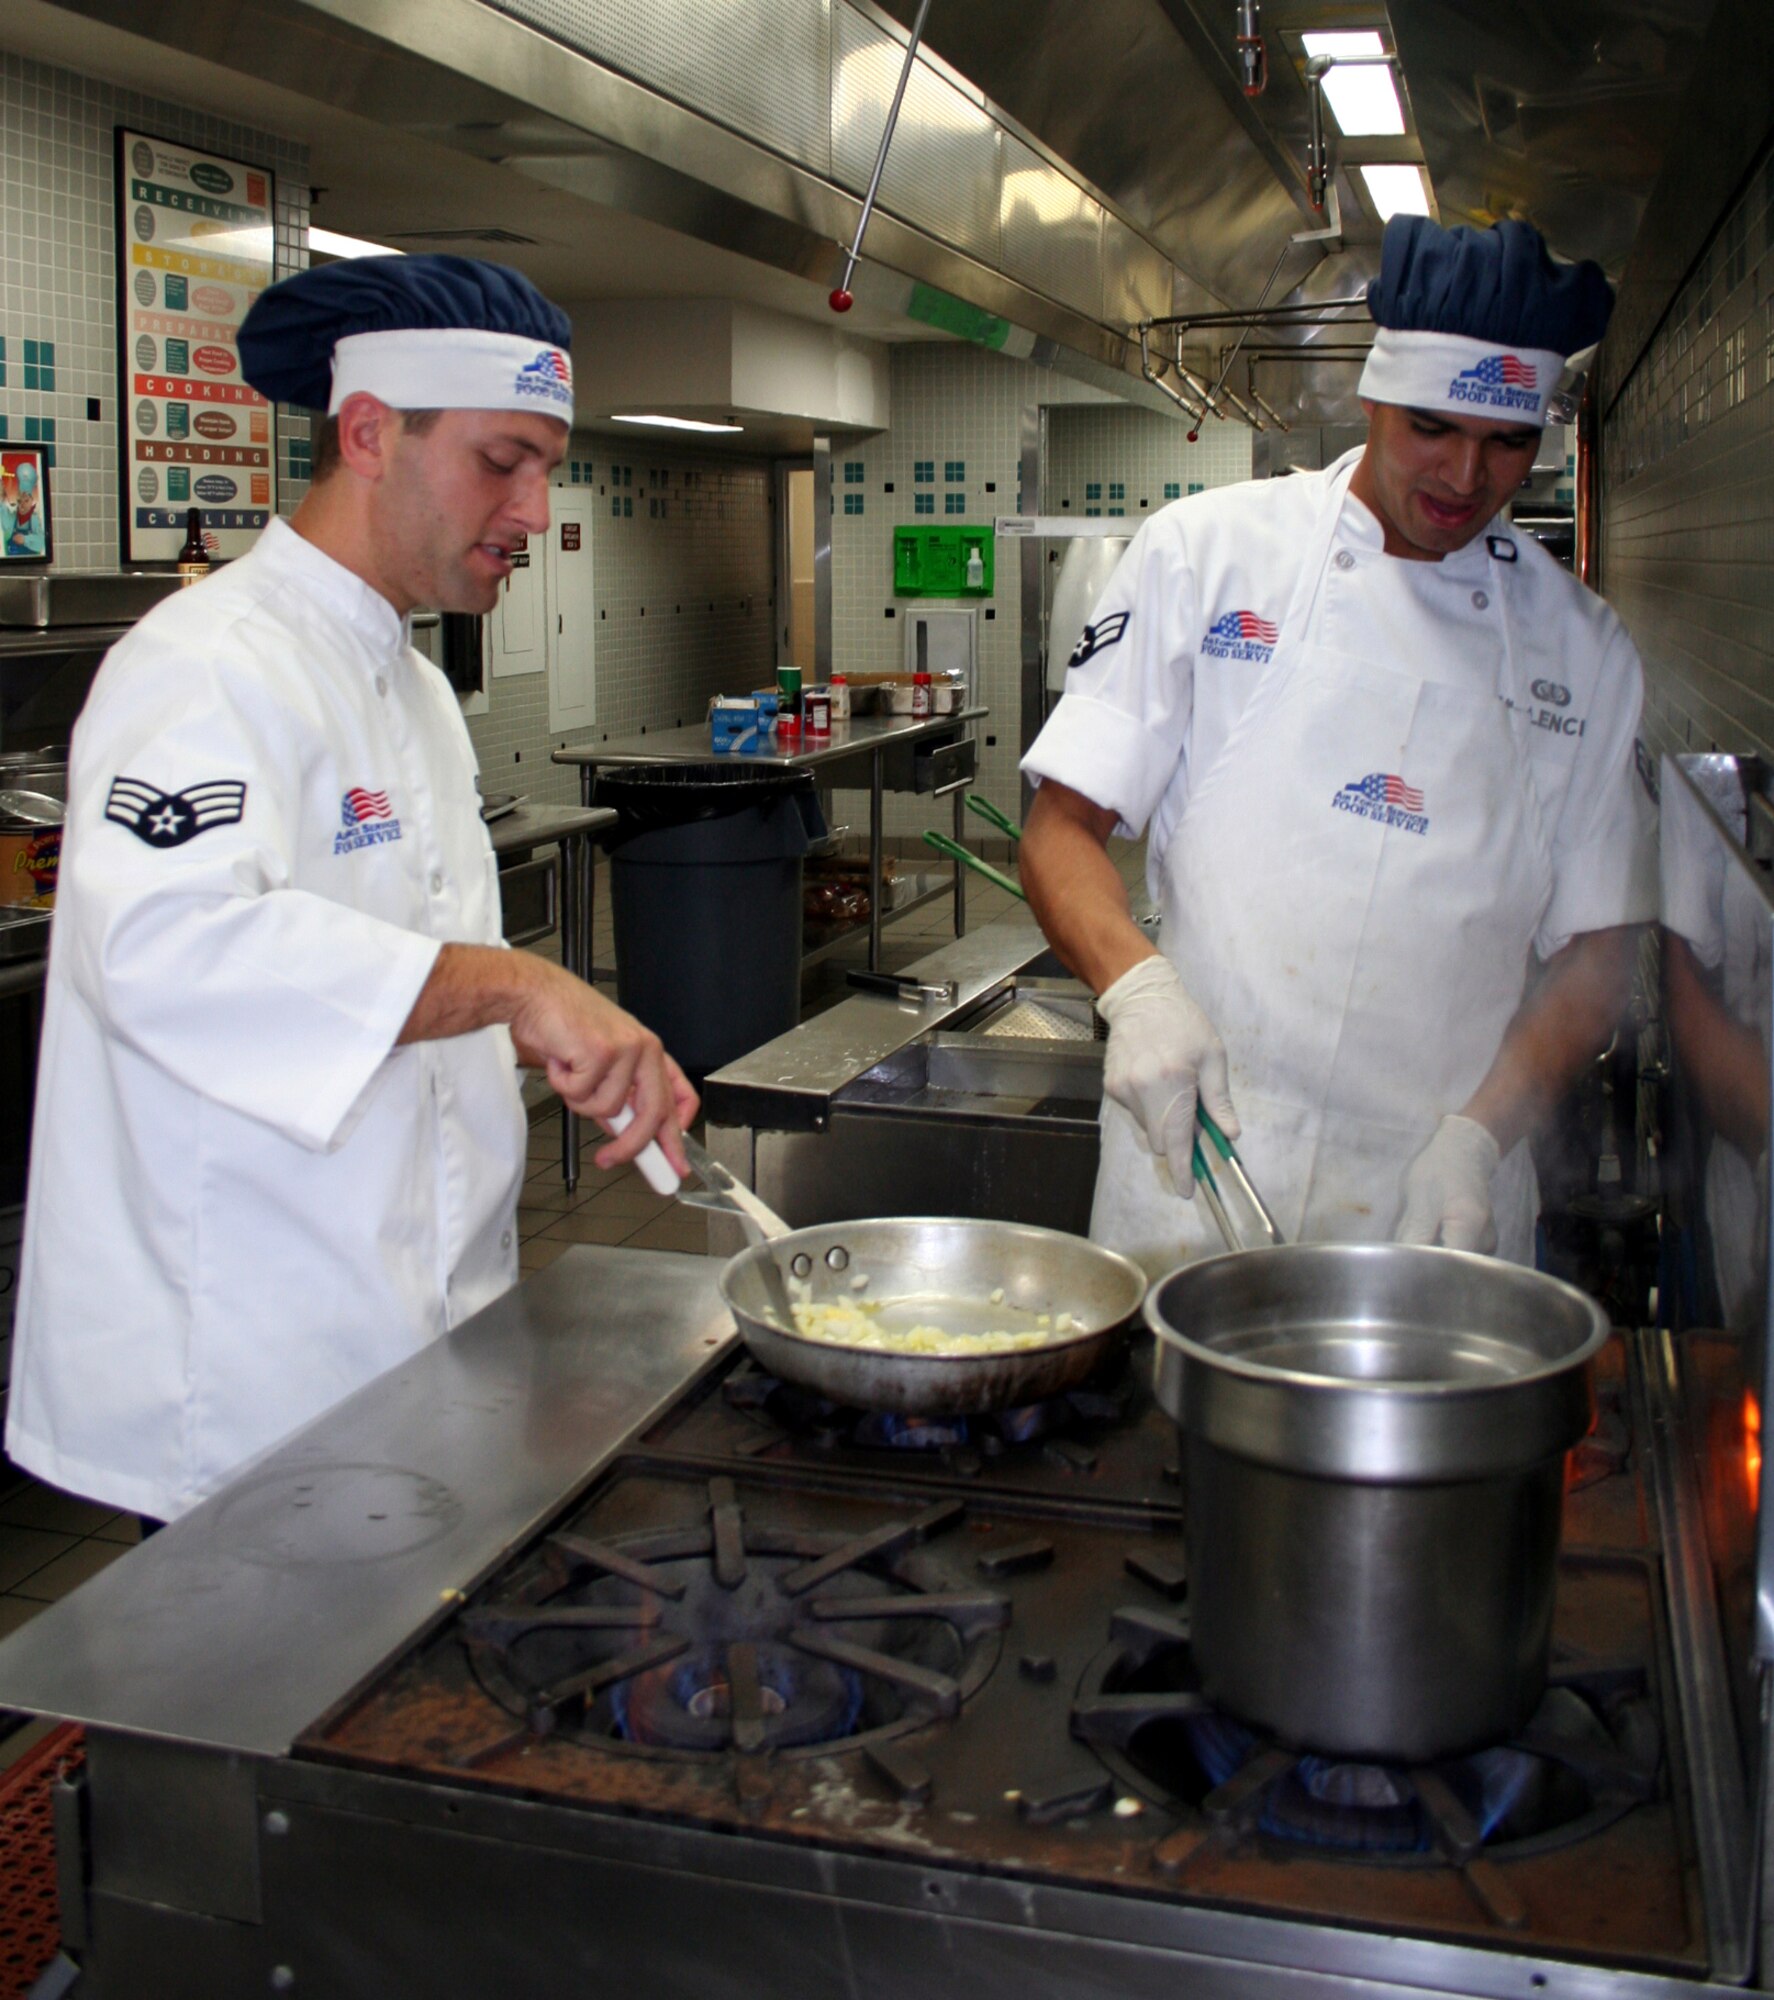 Senior Airman James Vest (left) and Airman 1st Class Louis Velencia, both with 16th Services Squadron, share a stove during the Chef of the Quarter cook-off competition held July 21 in The Reef dining facility. (U.S. Air Force Photograph by Jamie Haig)